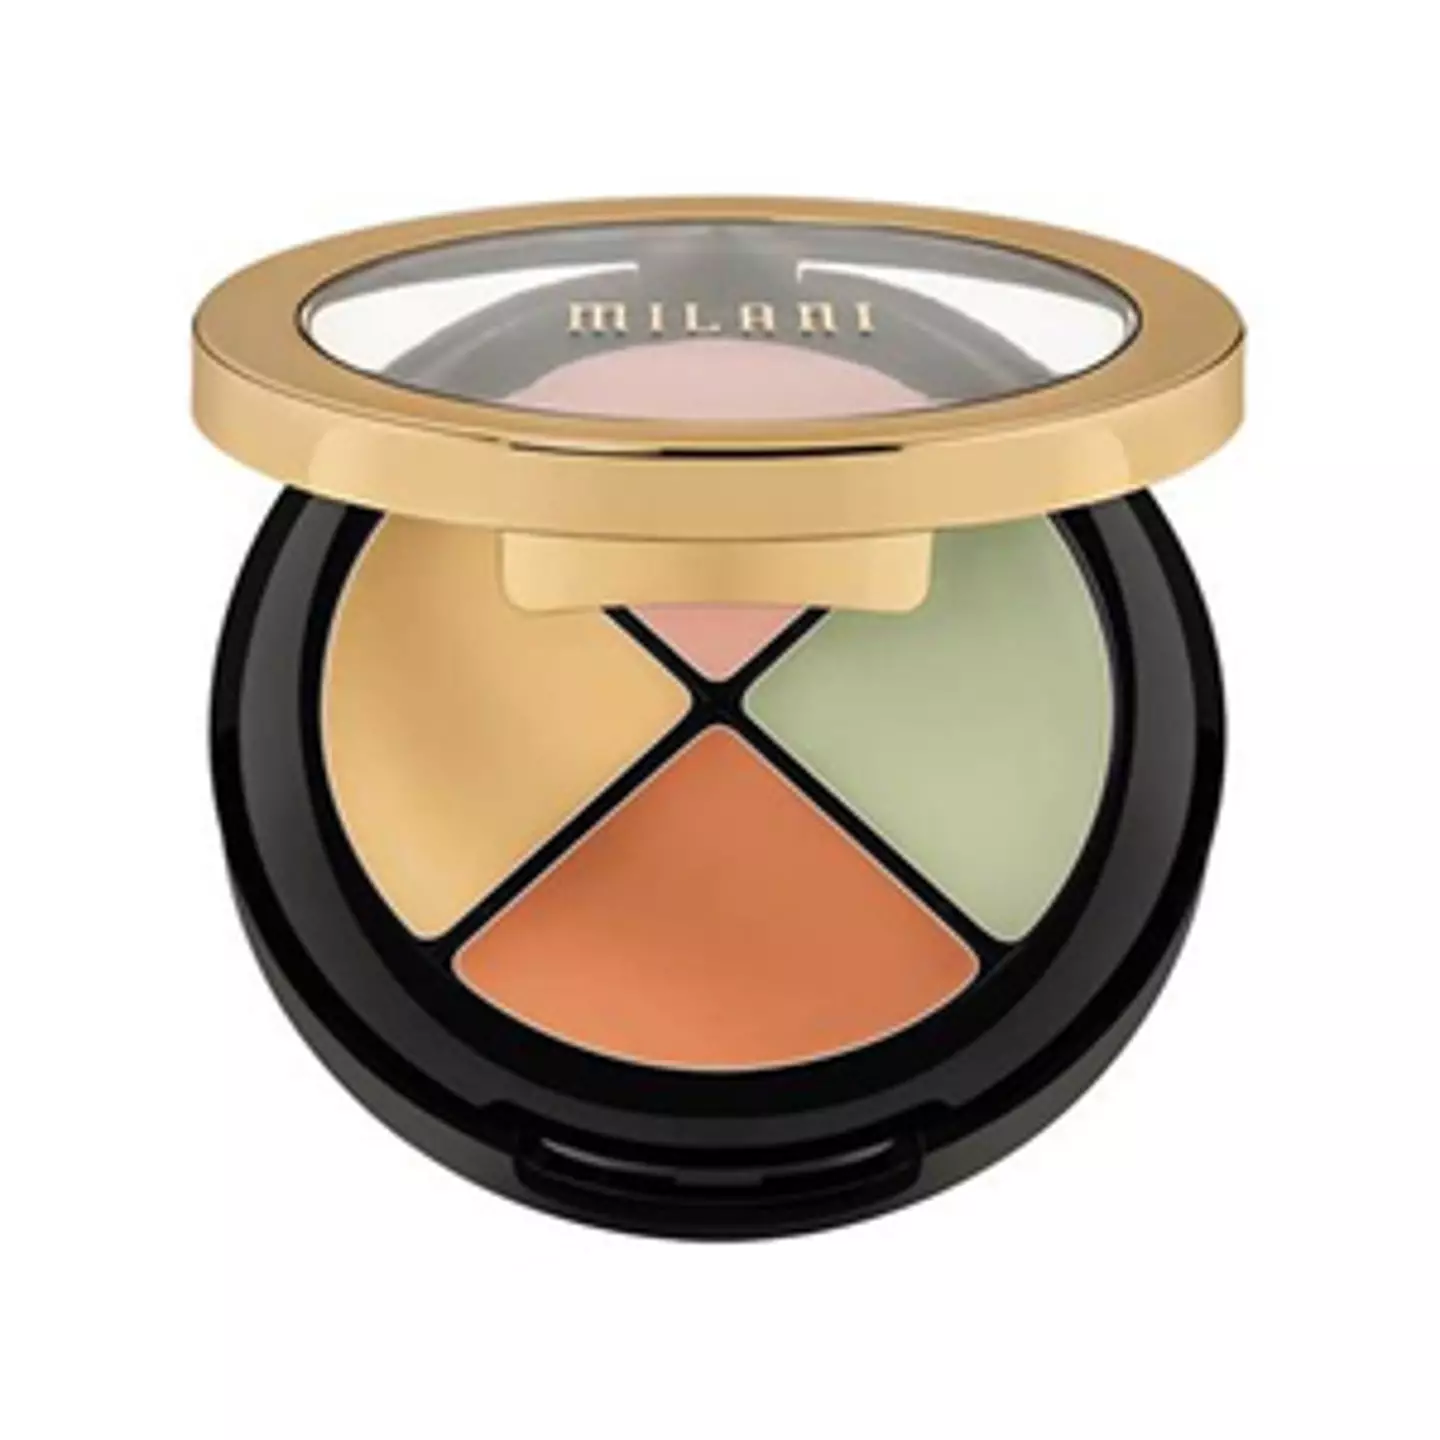 Milani's correcting kit supposedly used by Heard.